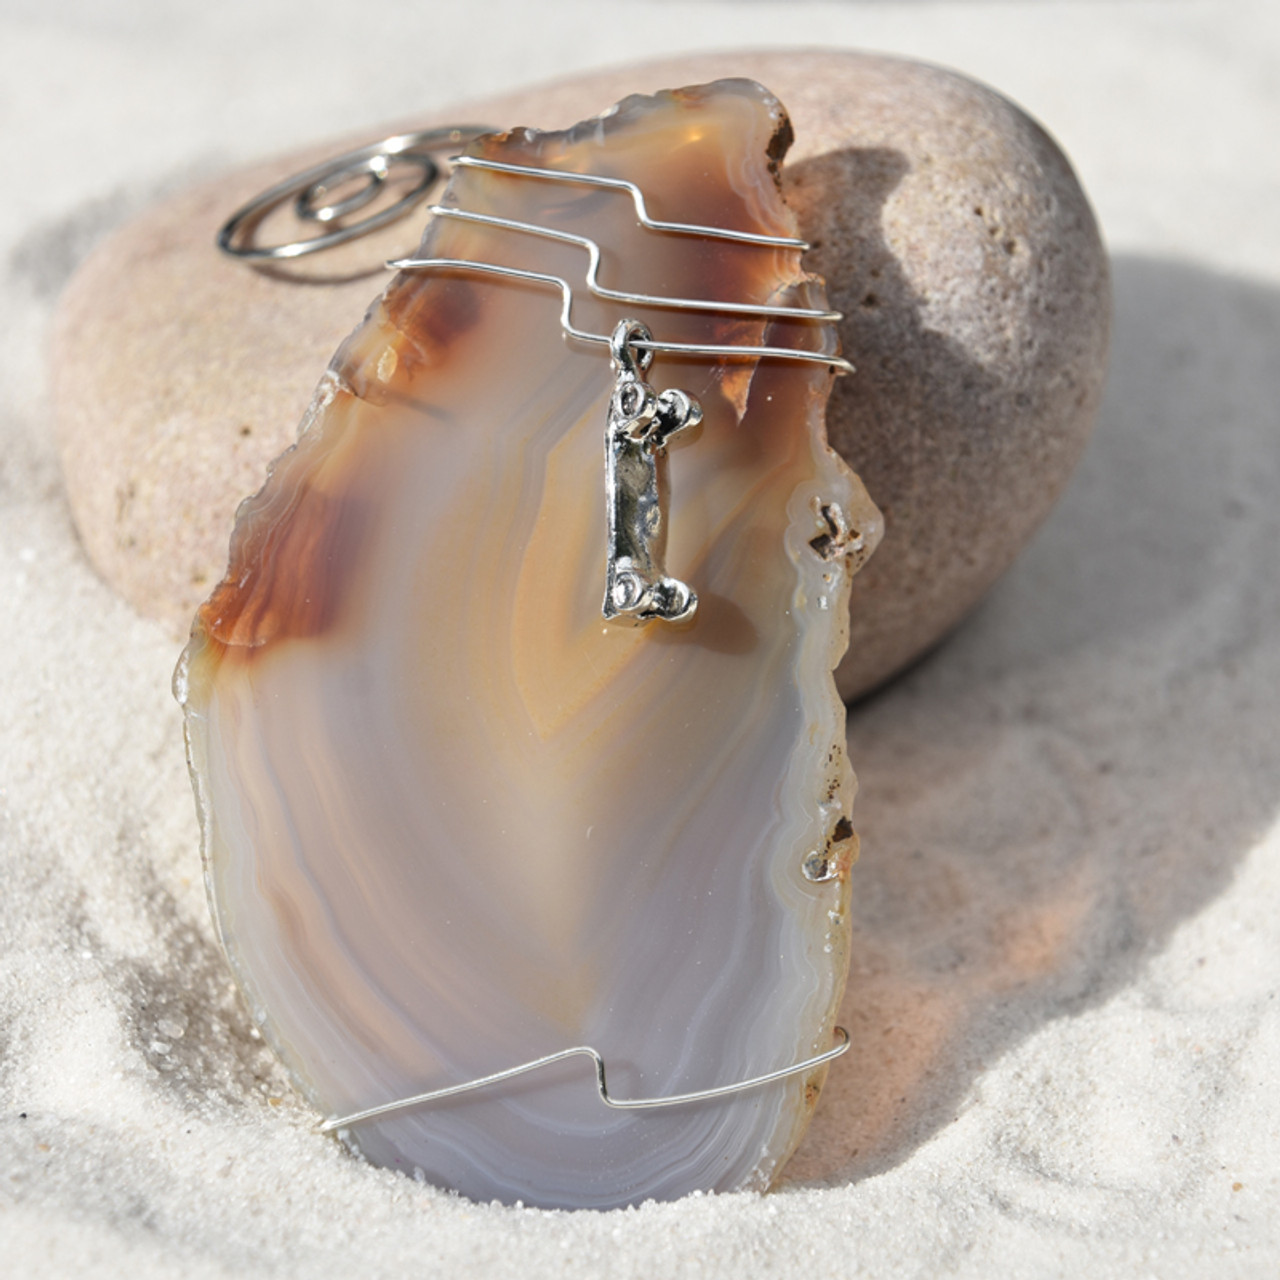 Skateboard Charm on a Wire Wrapped Agate Slice Ornament - Choose Your Agate Slice Color- Made to Order